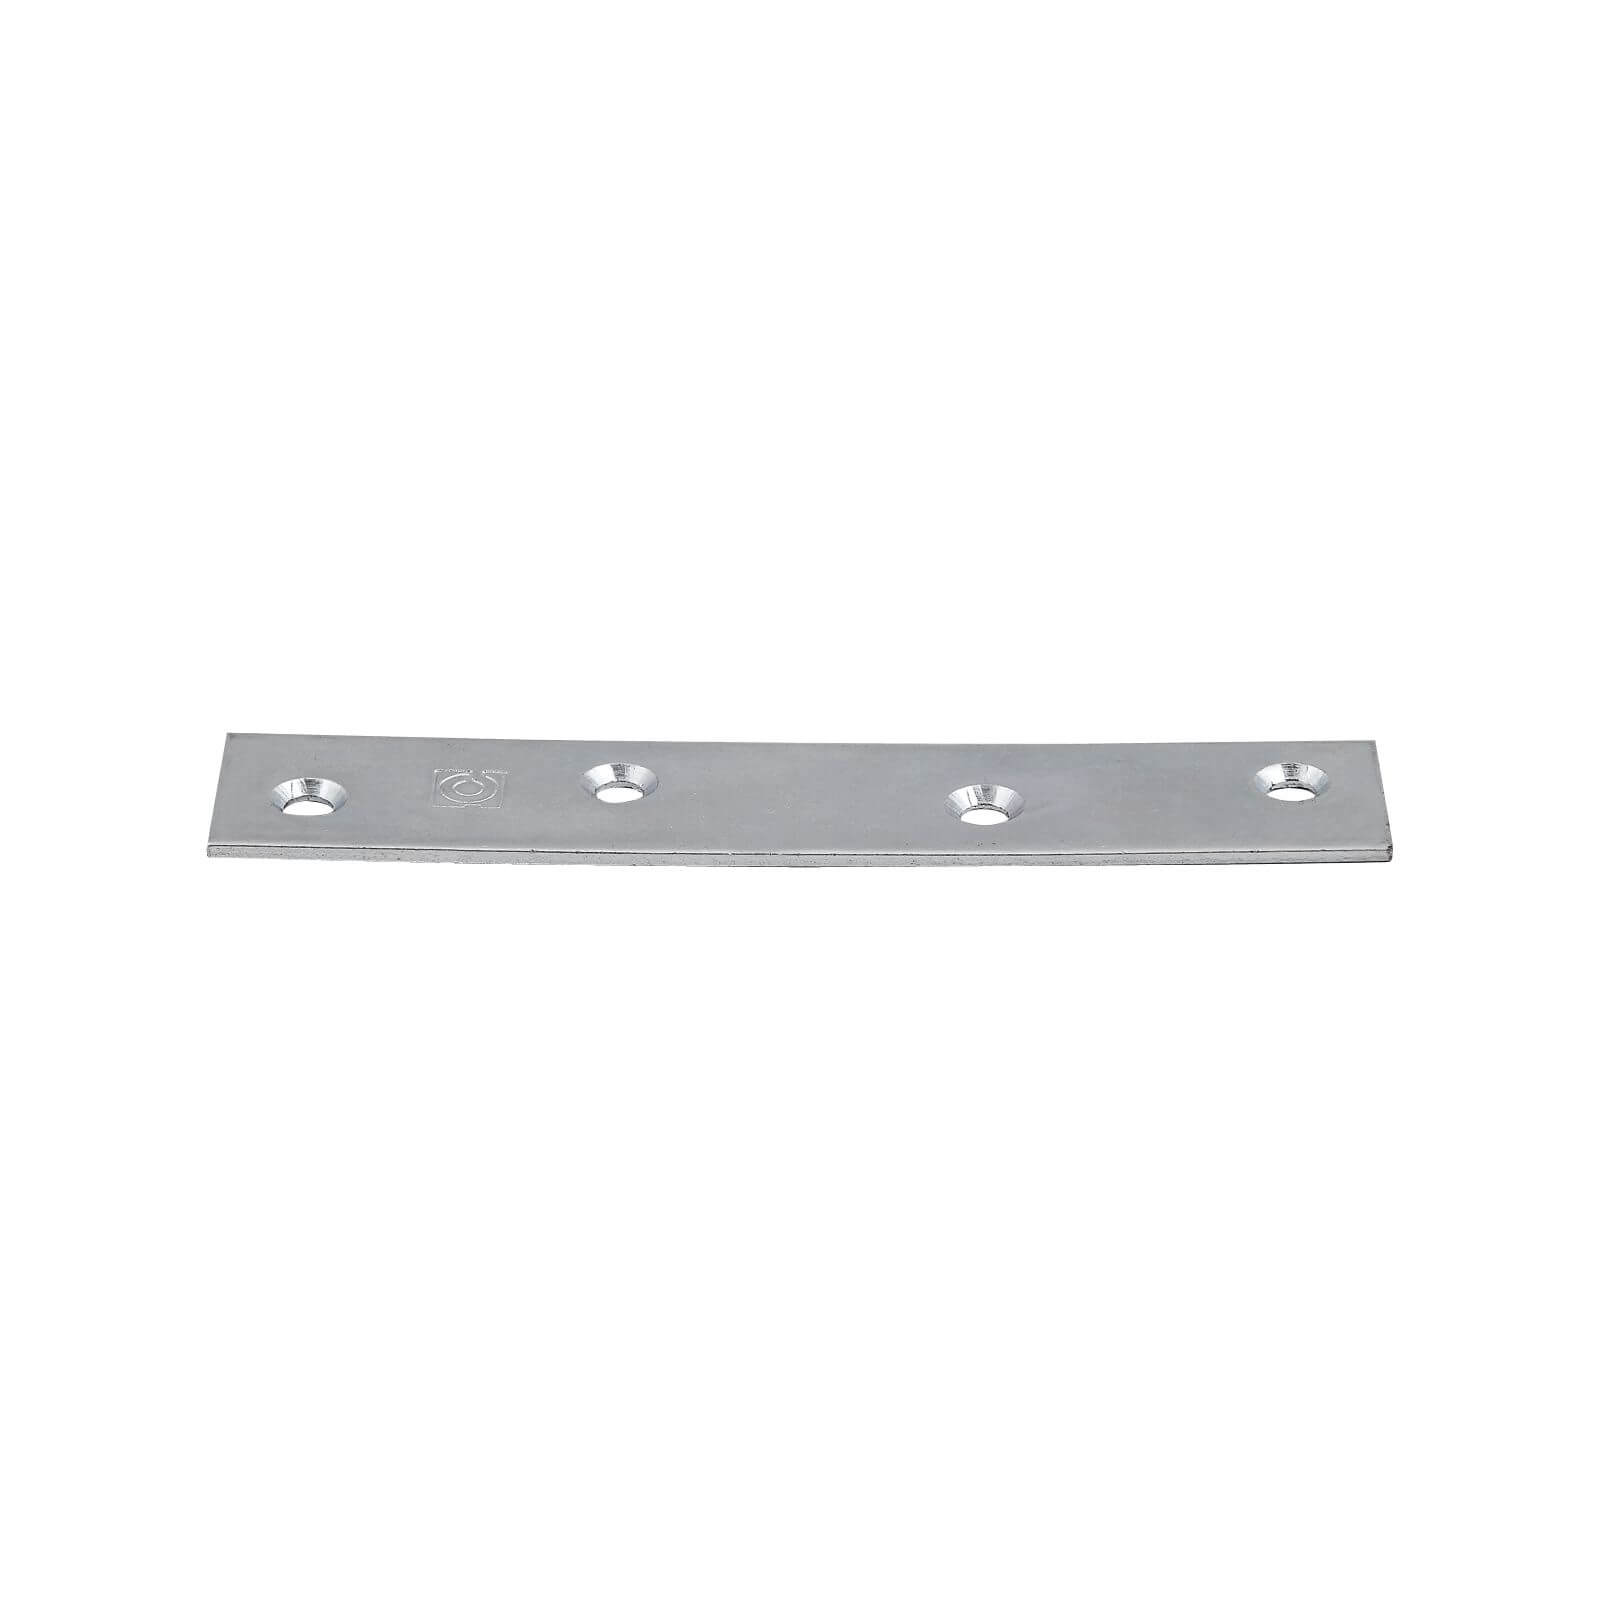 Mending Plate Bright Zinc Plated - 75mm - Pack Of 8